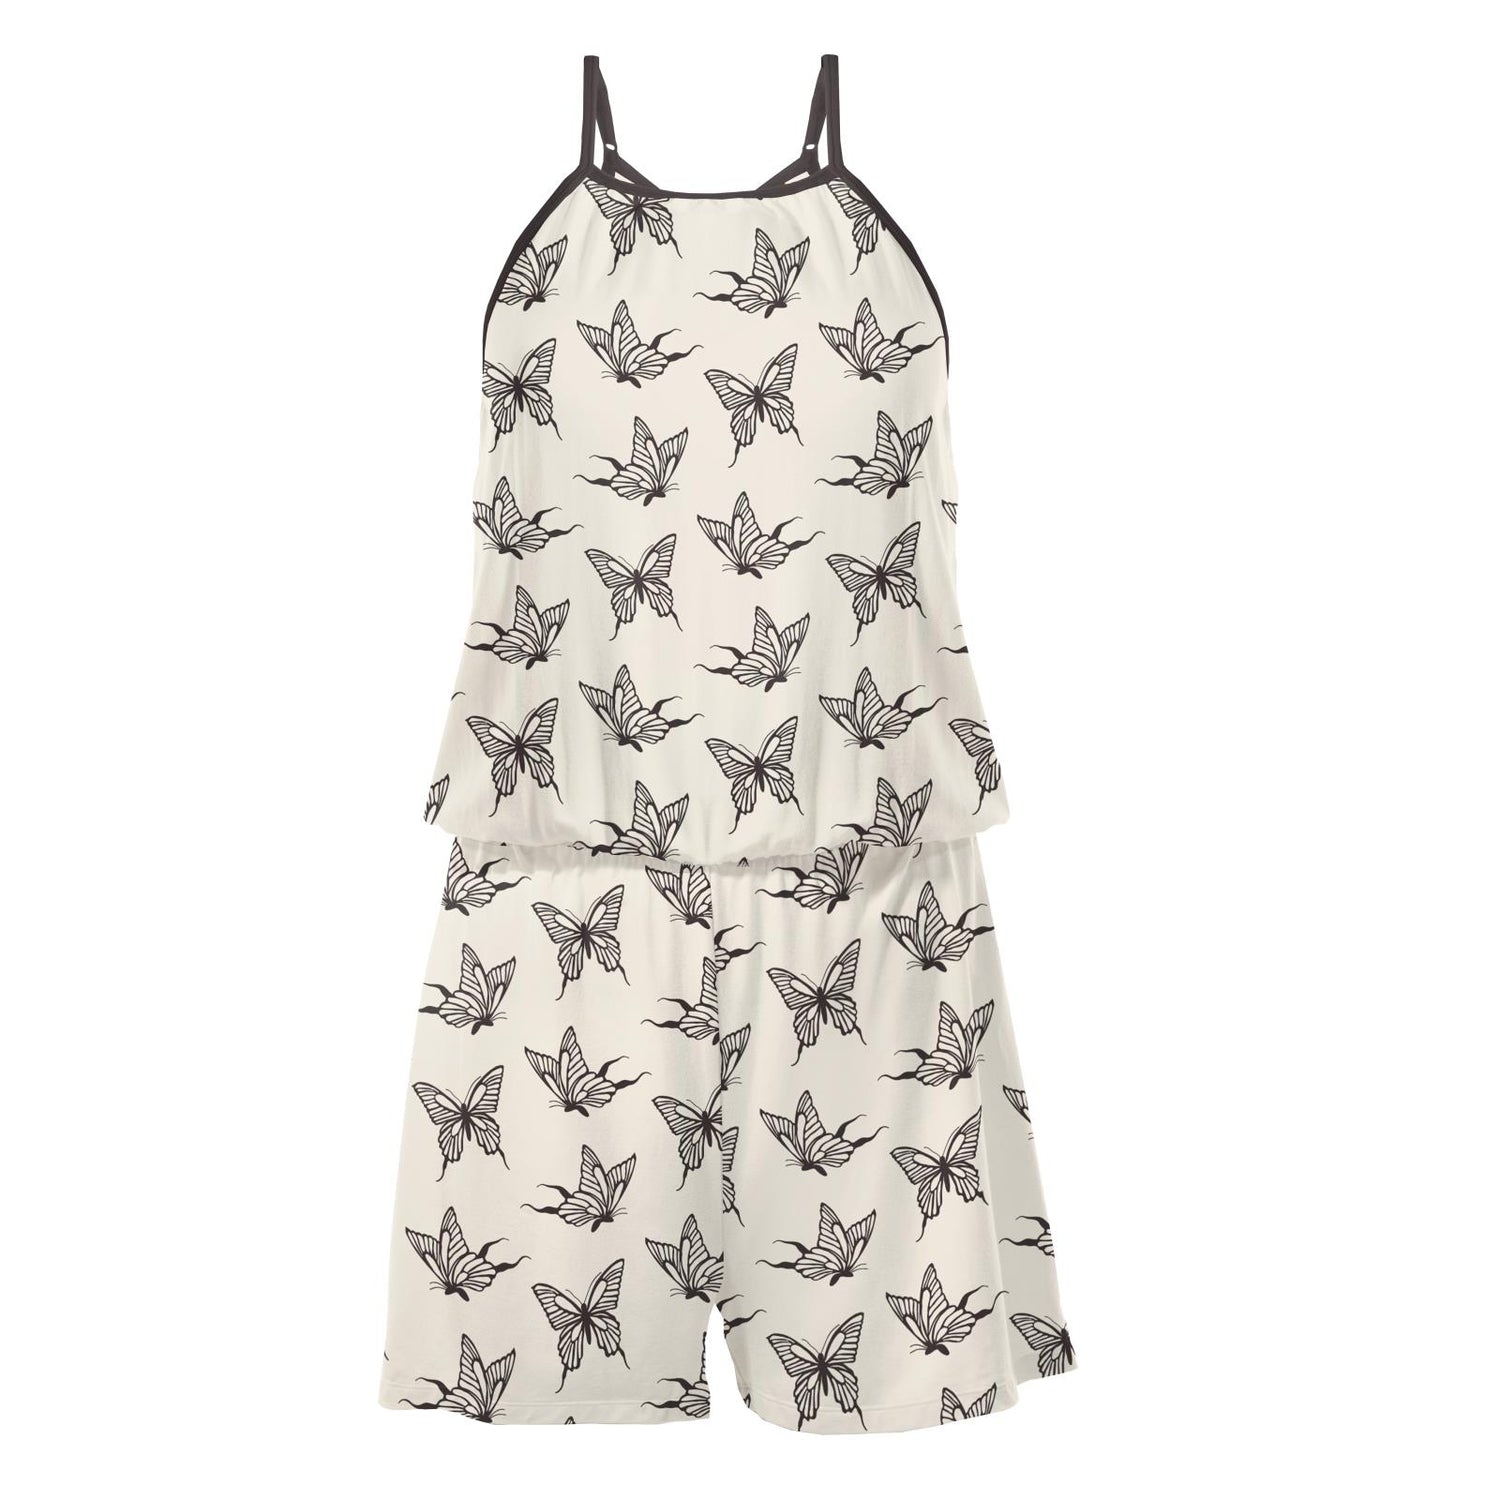 Women's Print Keyhole Romper in Natural Swallowtail